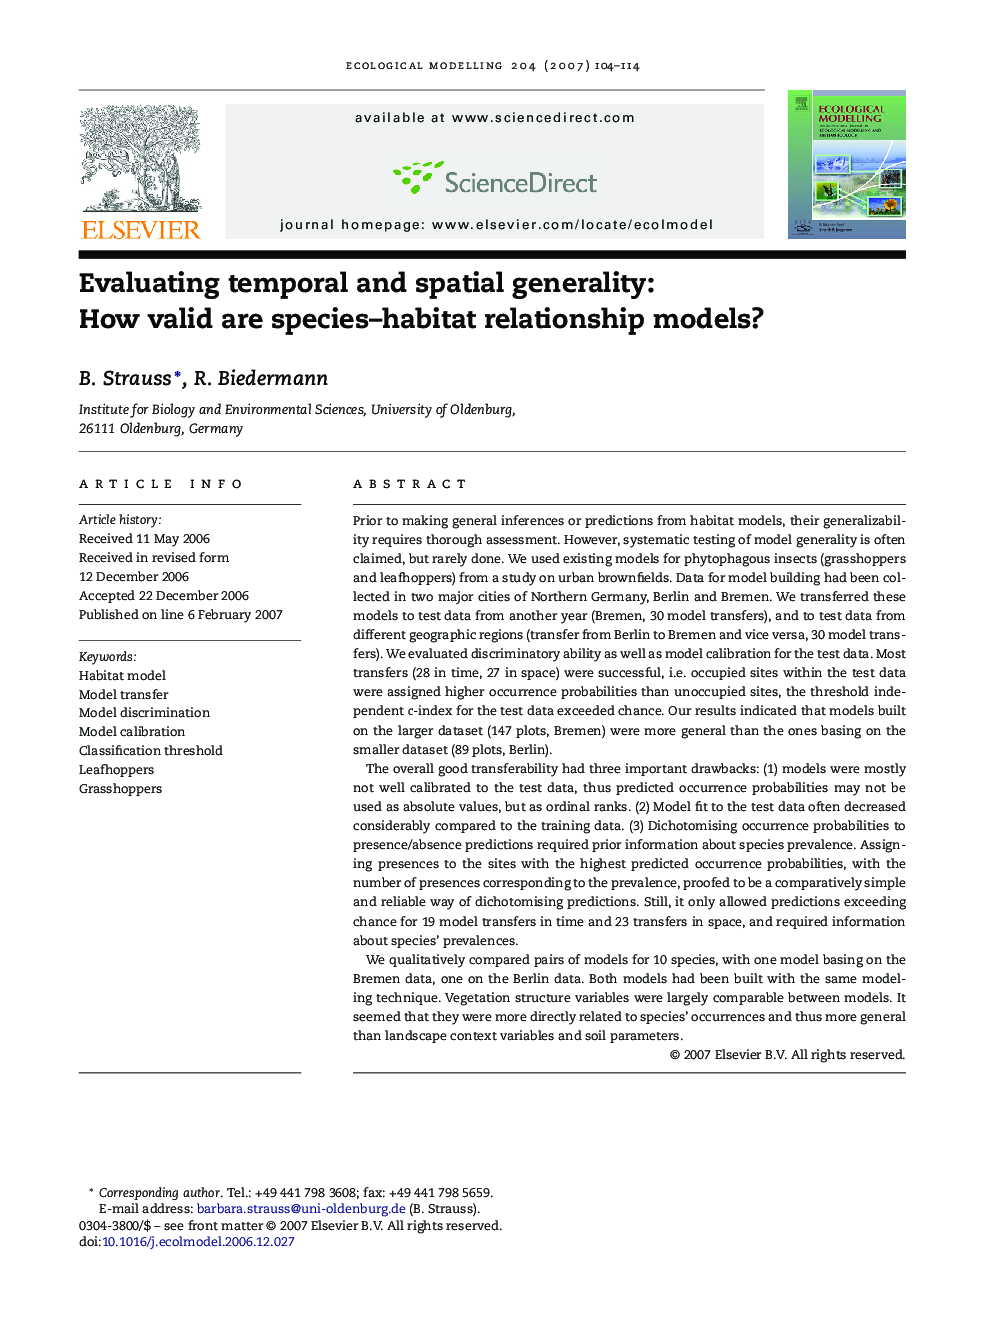 Evaluating temporal and spatial generality: How valid are species-habitat relationship models?